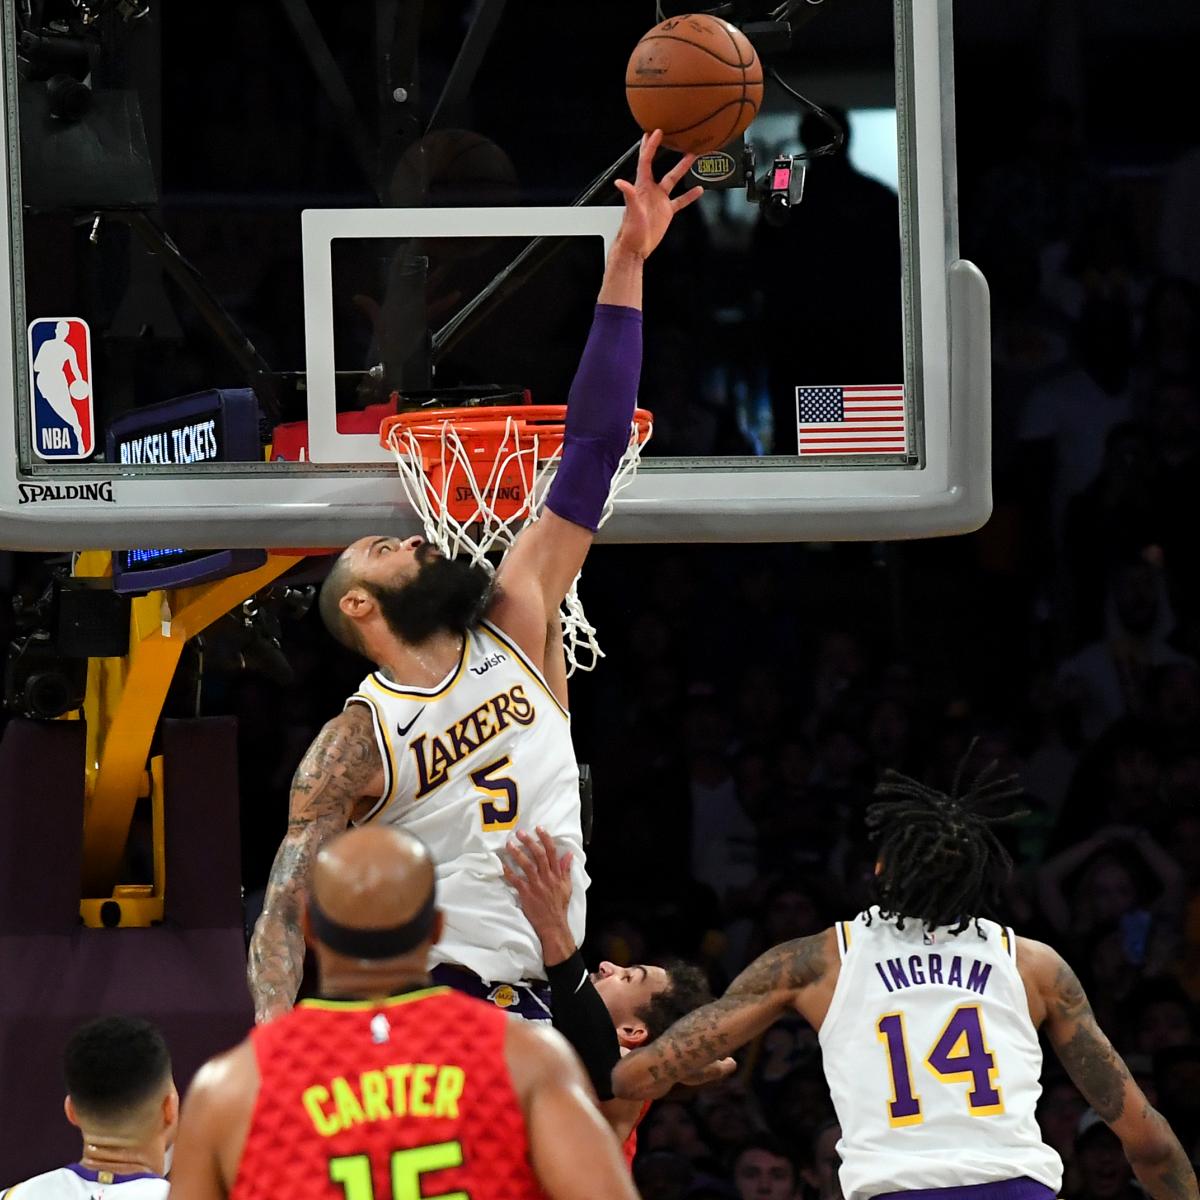 Nba L2m Report Lakers Tyson Chandler S Block On Trae Young Wasn T Goaltending Bleacher Report Latest News Videos And Highlights